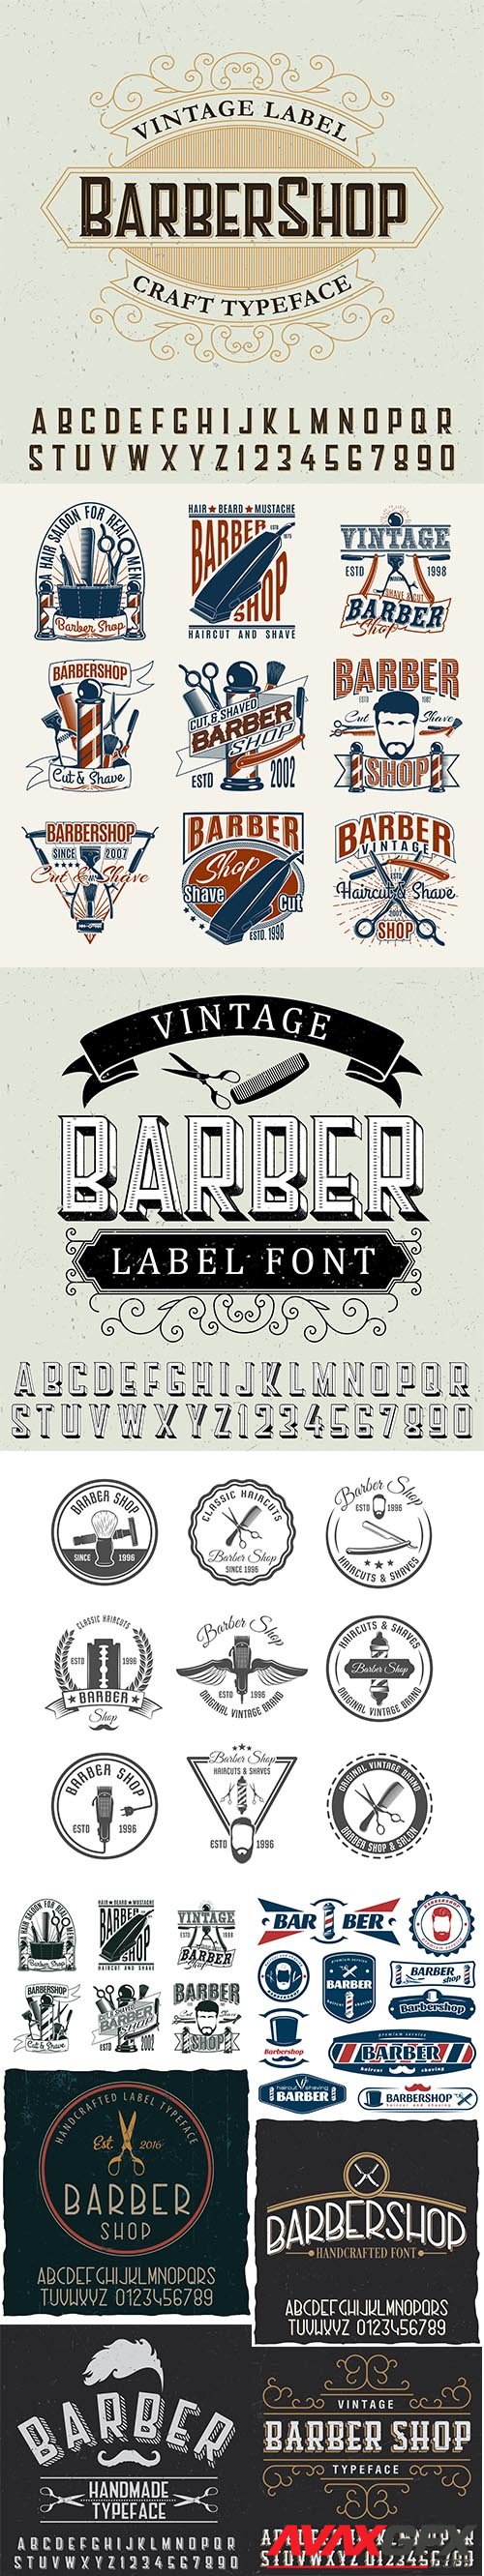 Collection of vintage barber shop logos, letters and poster